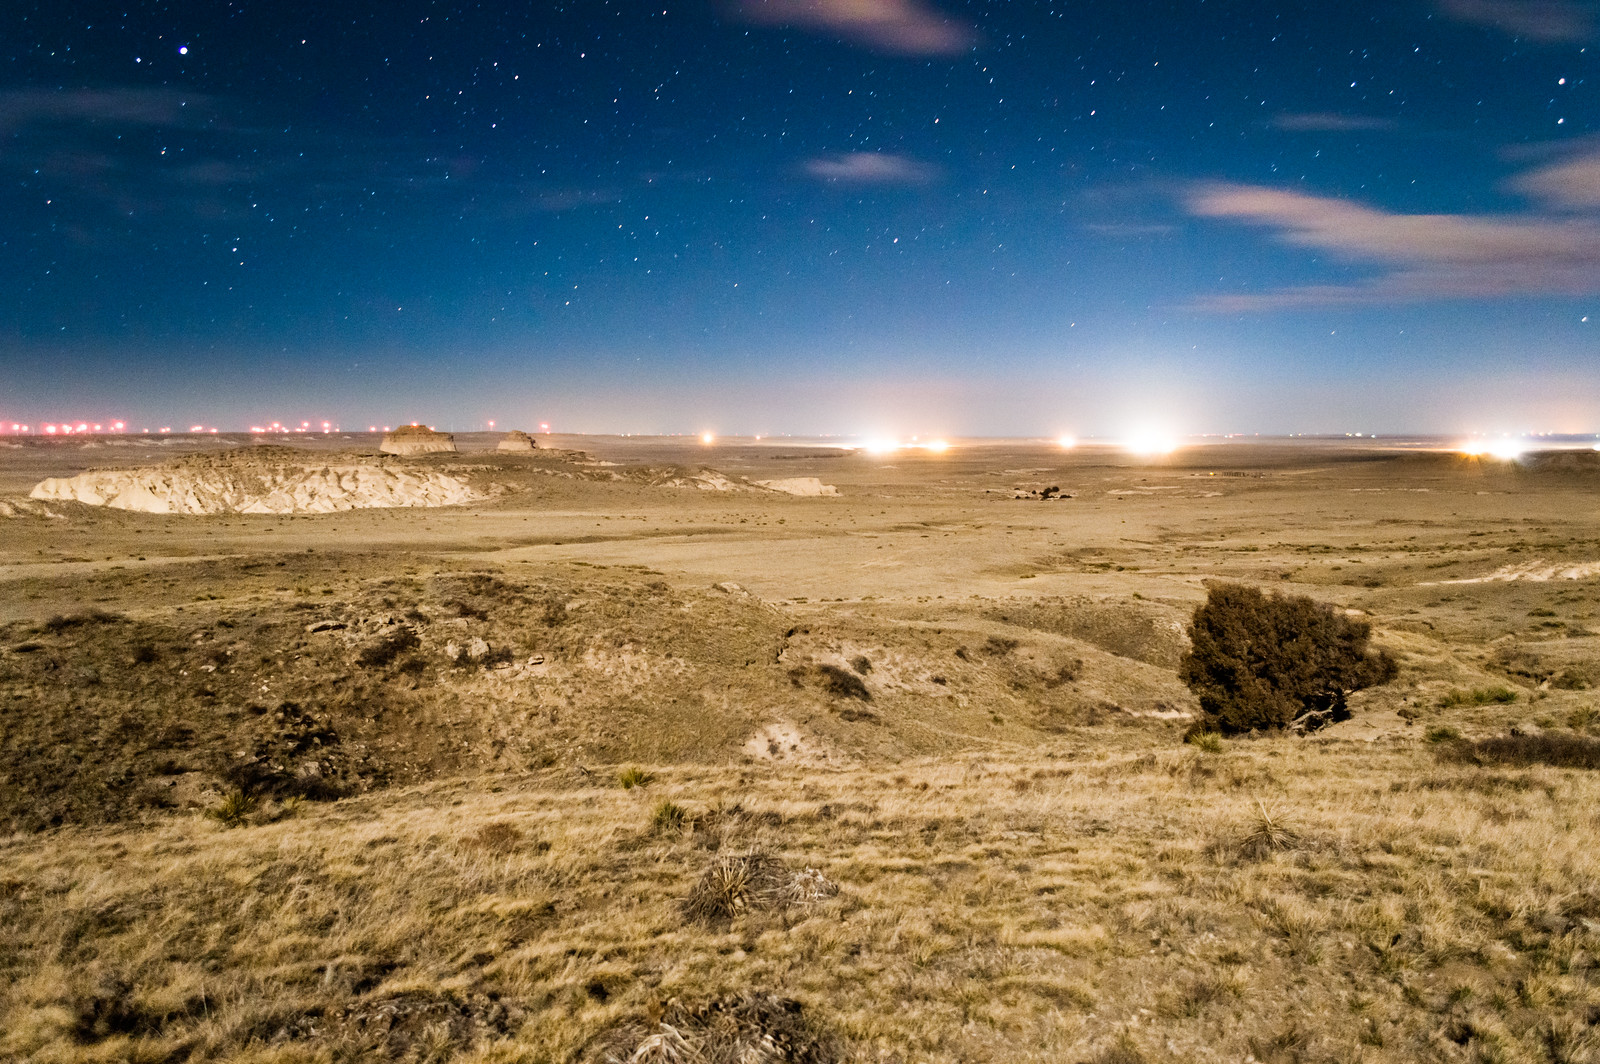 Photograph of a grassy prairie or plain, probably at dusk or at night. Bright lights illuminate the horizon. On the left, lights are mostly small and orange in color. On the right, the lights are much brighter and white in color.